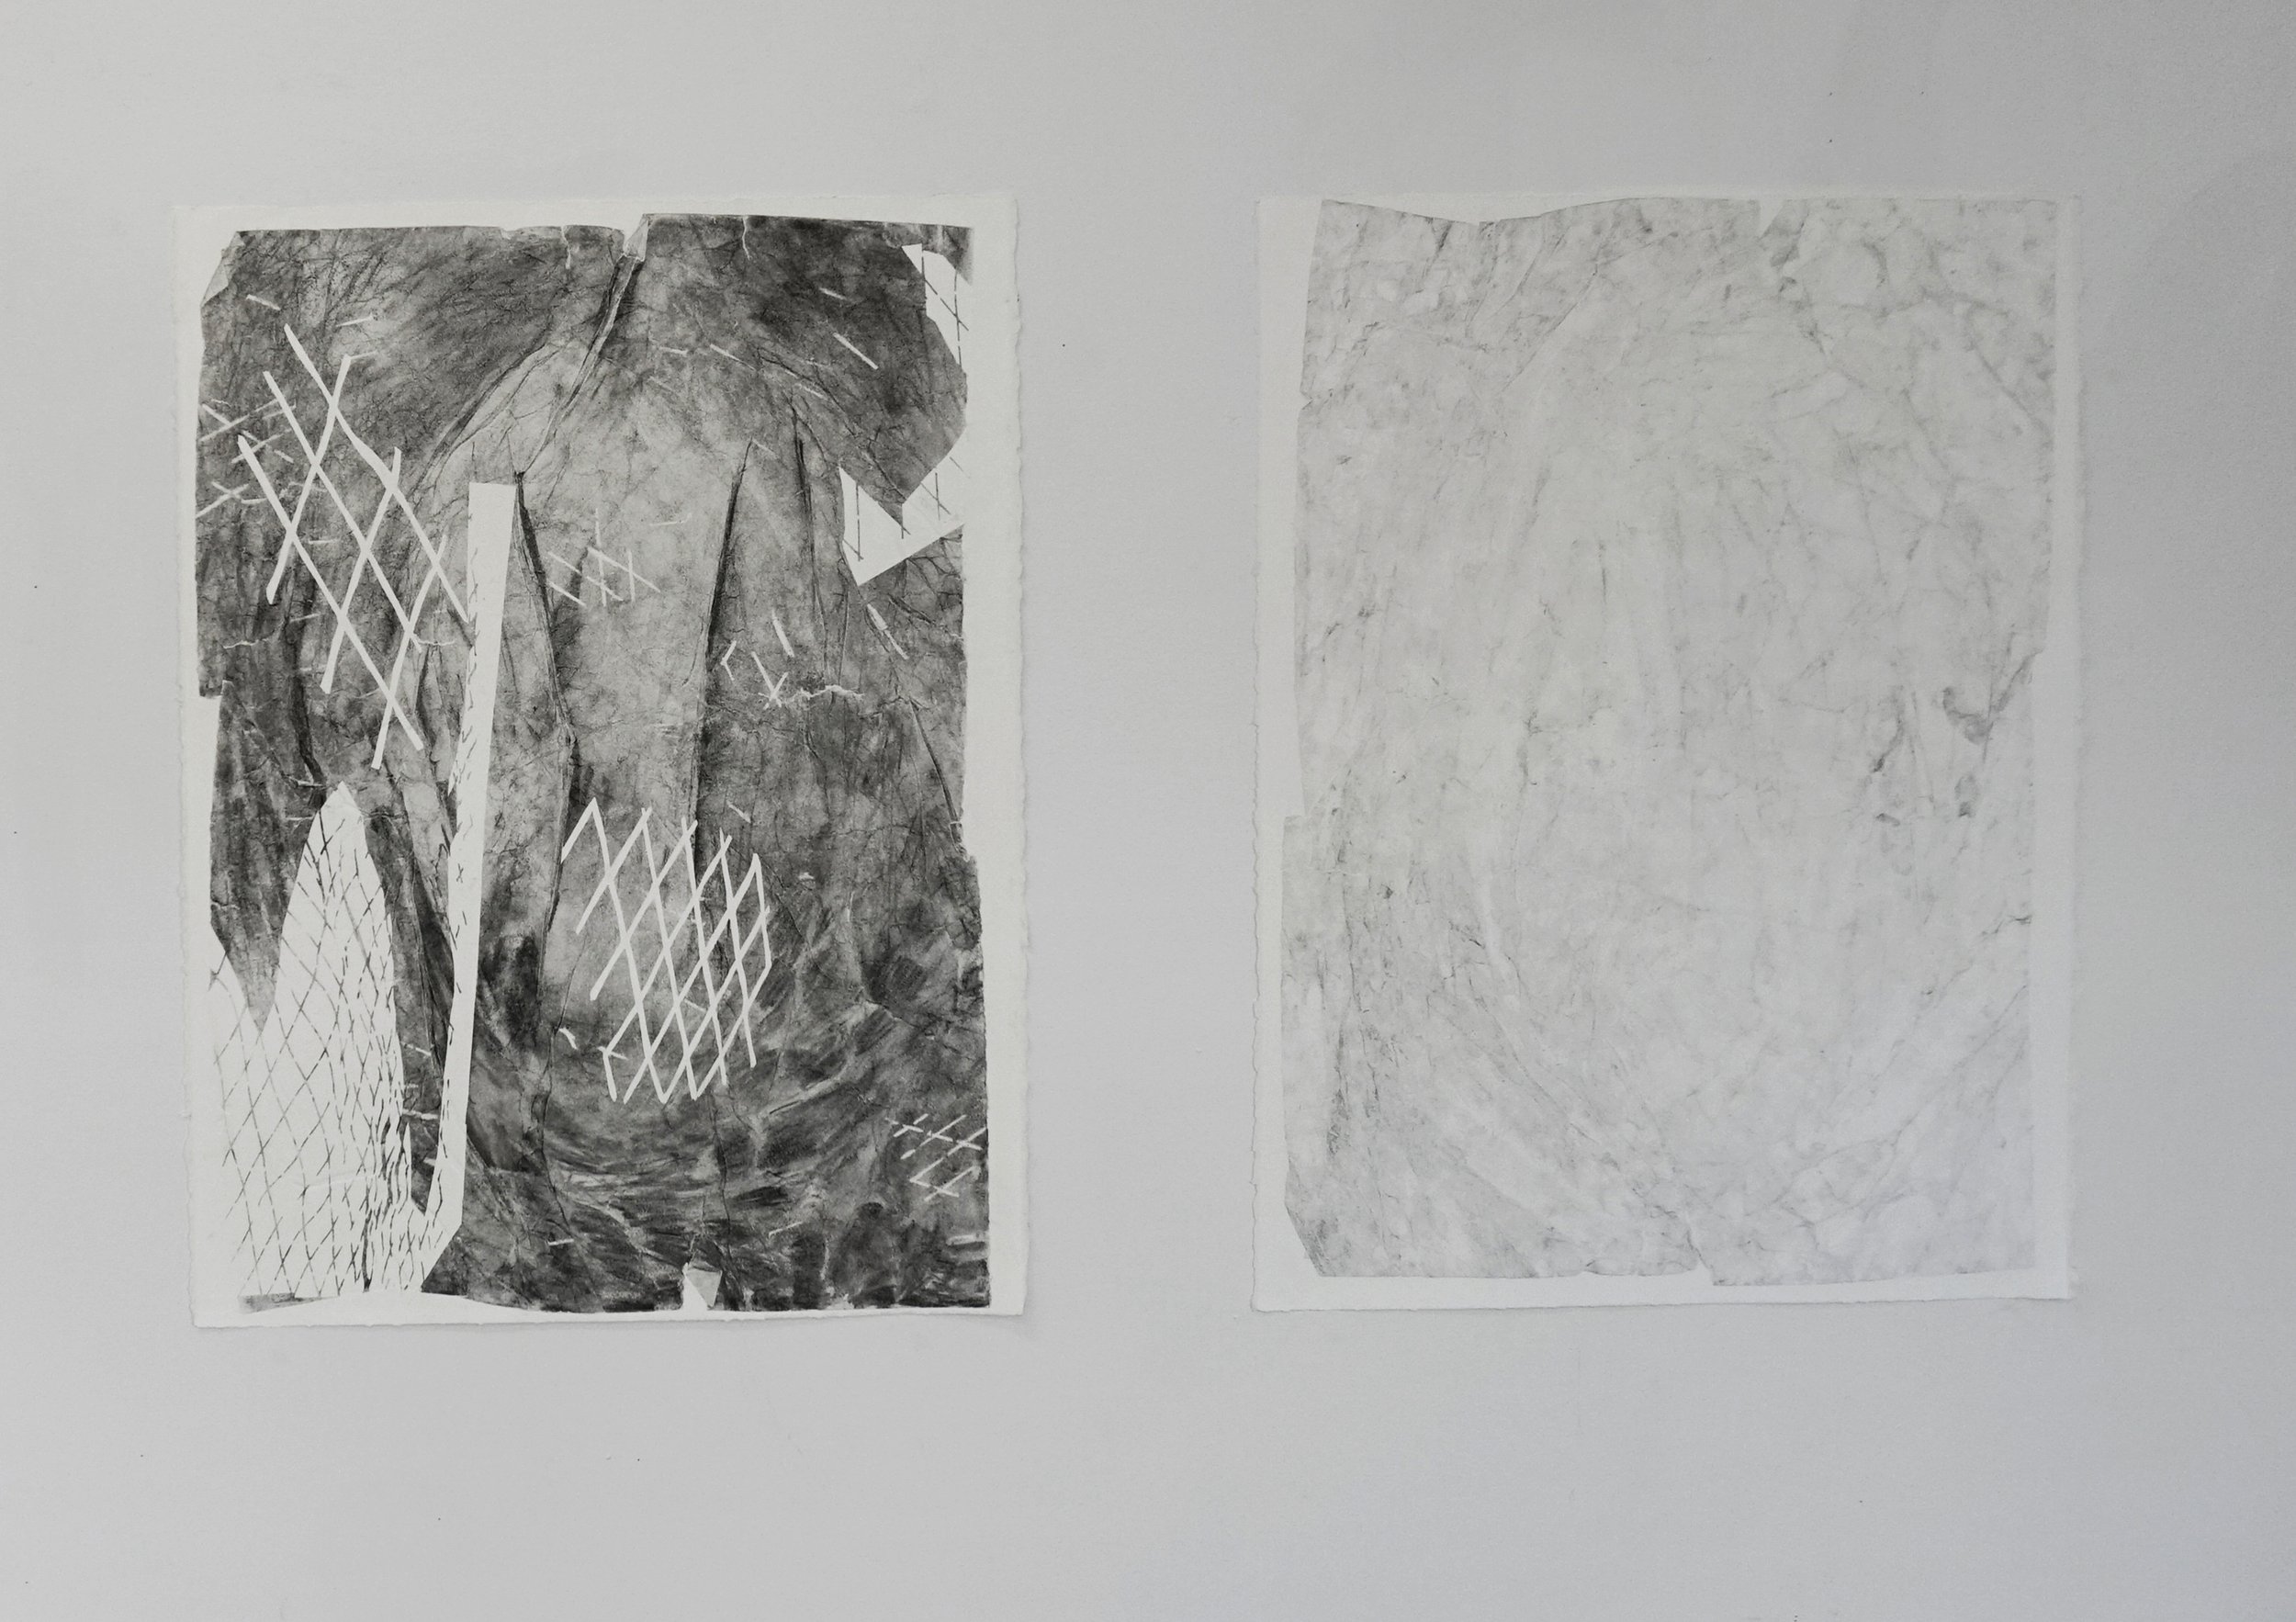   A Chain of Events, 2019.  Charcoal Monotypes on BFK  